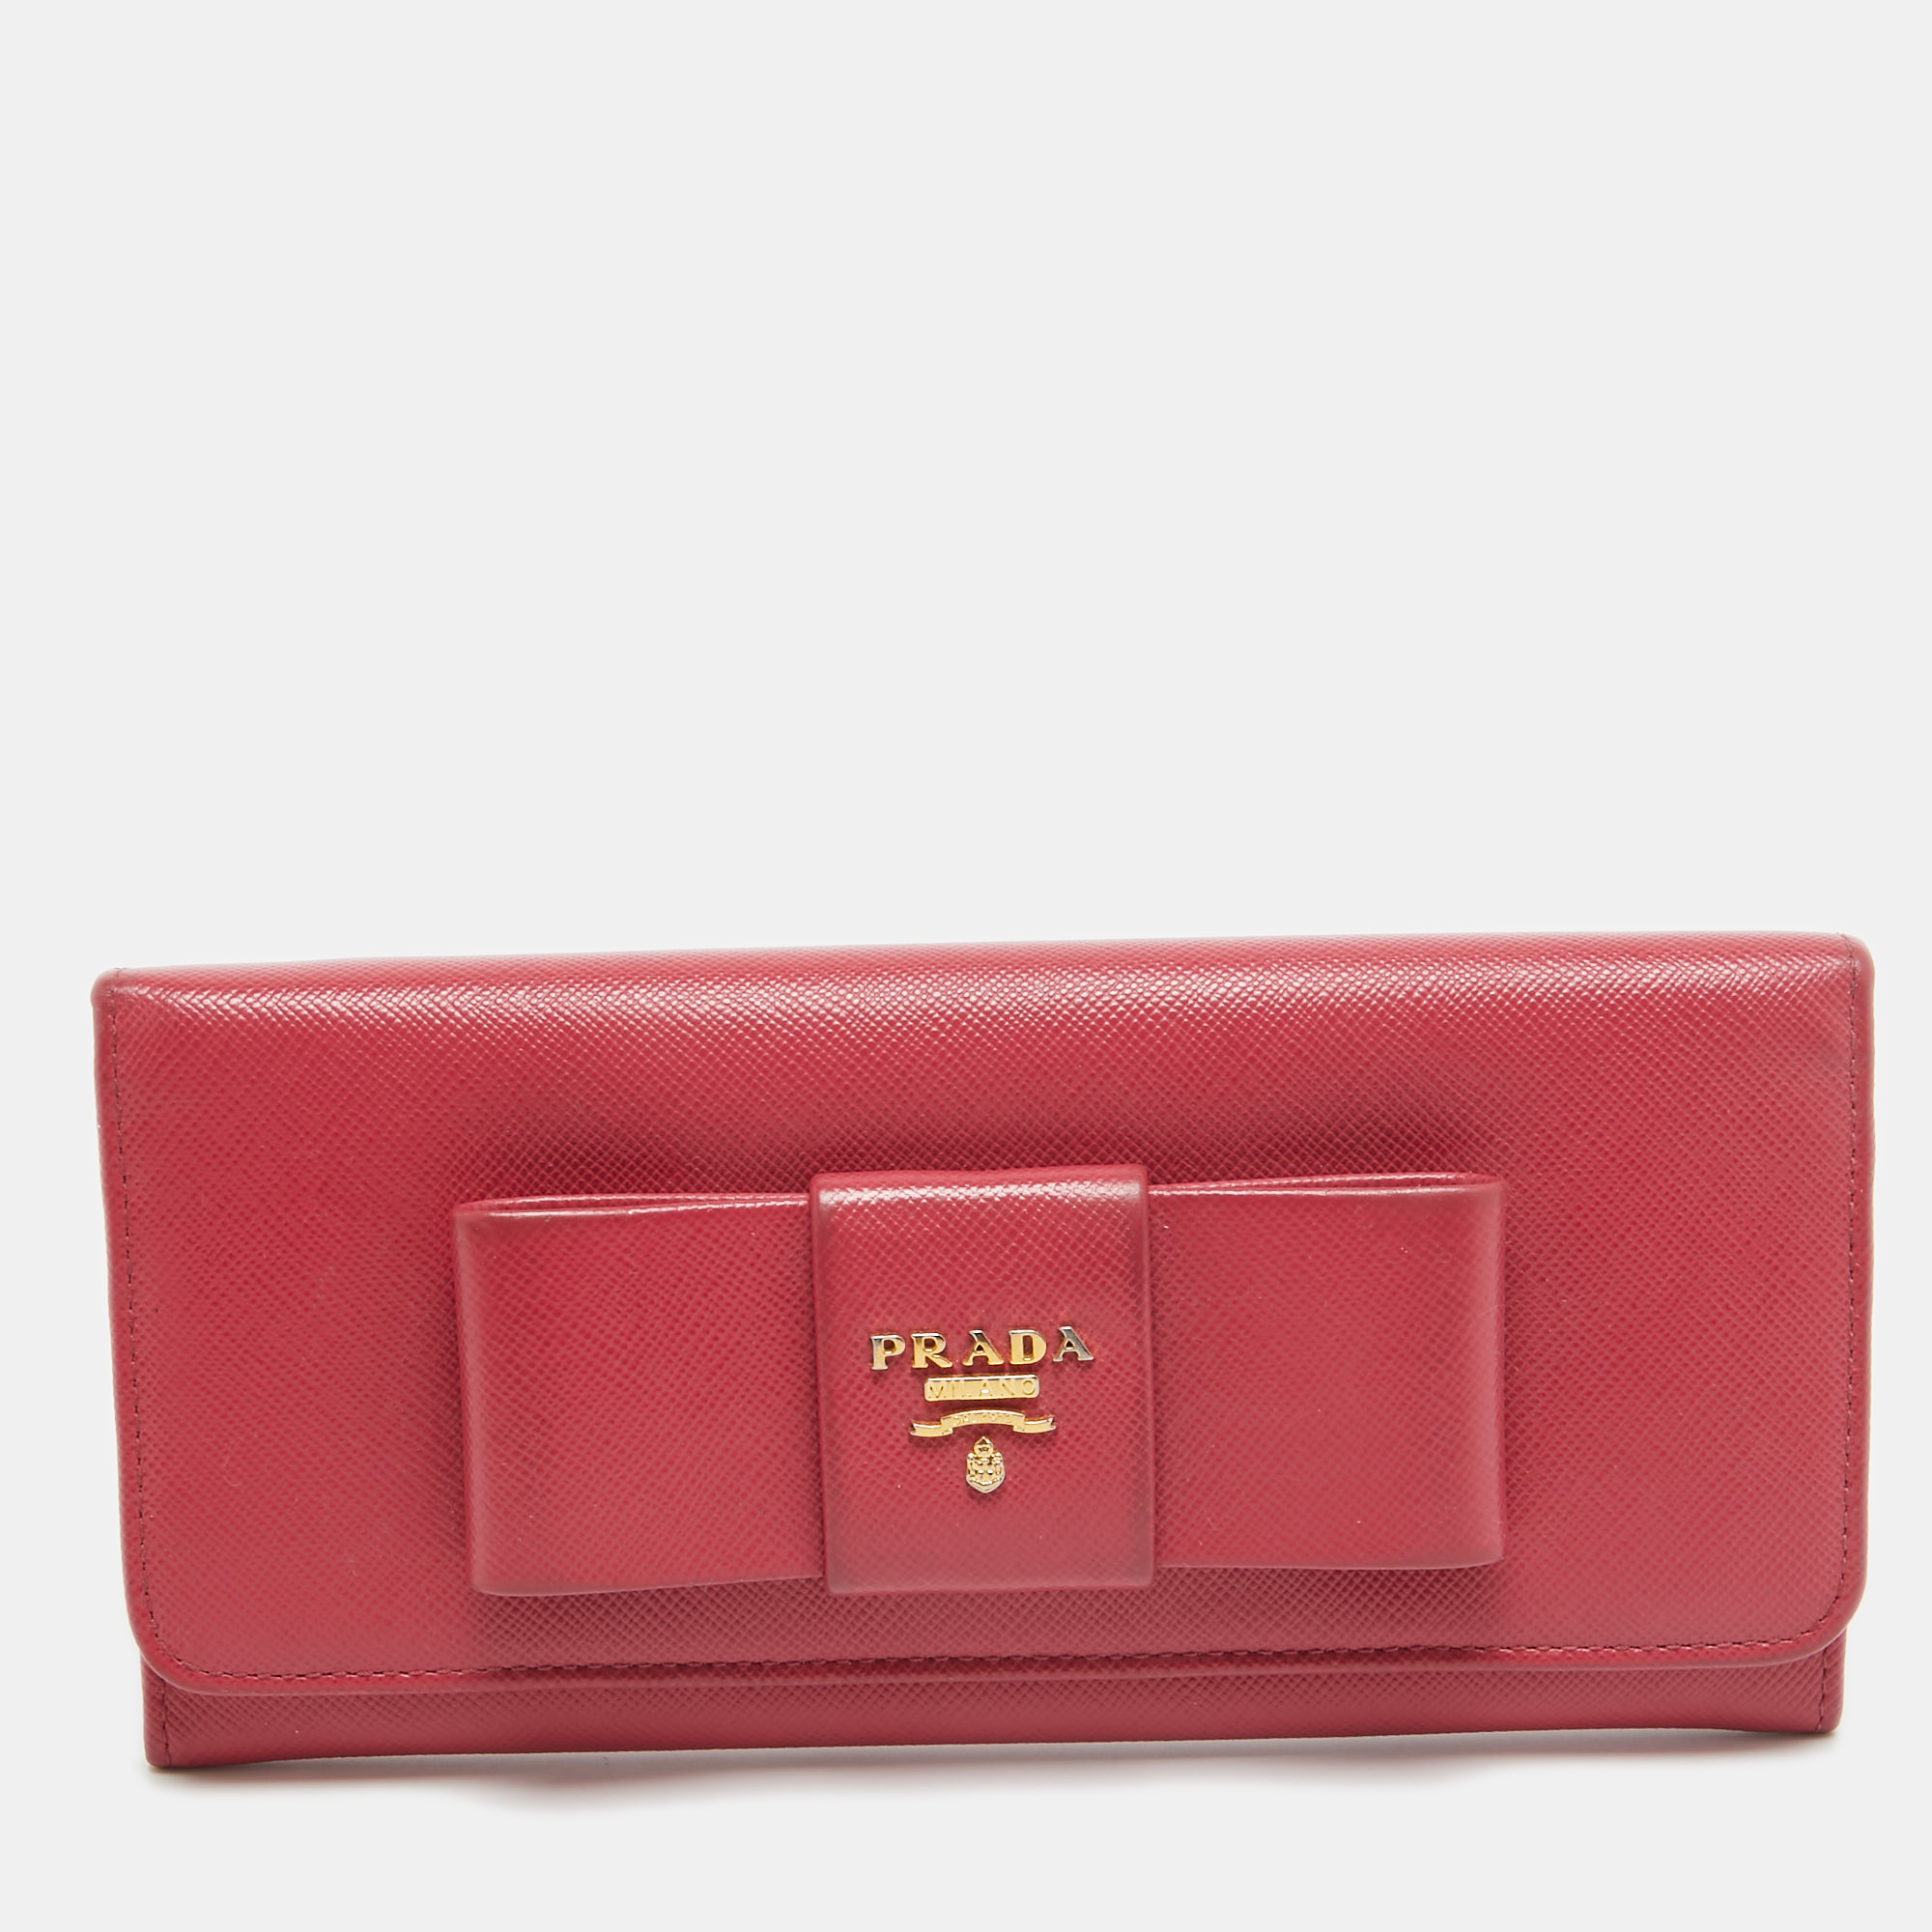 Compact and stylish this Prada wallet will be your favorite grab and go companion. Designed from quality materials its interior is divided into different compartments to store your cards and cash perfectly.